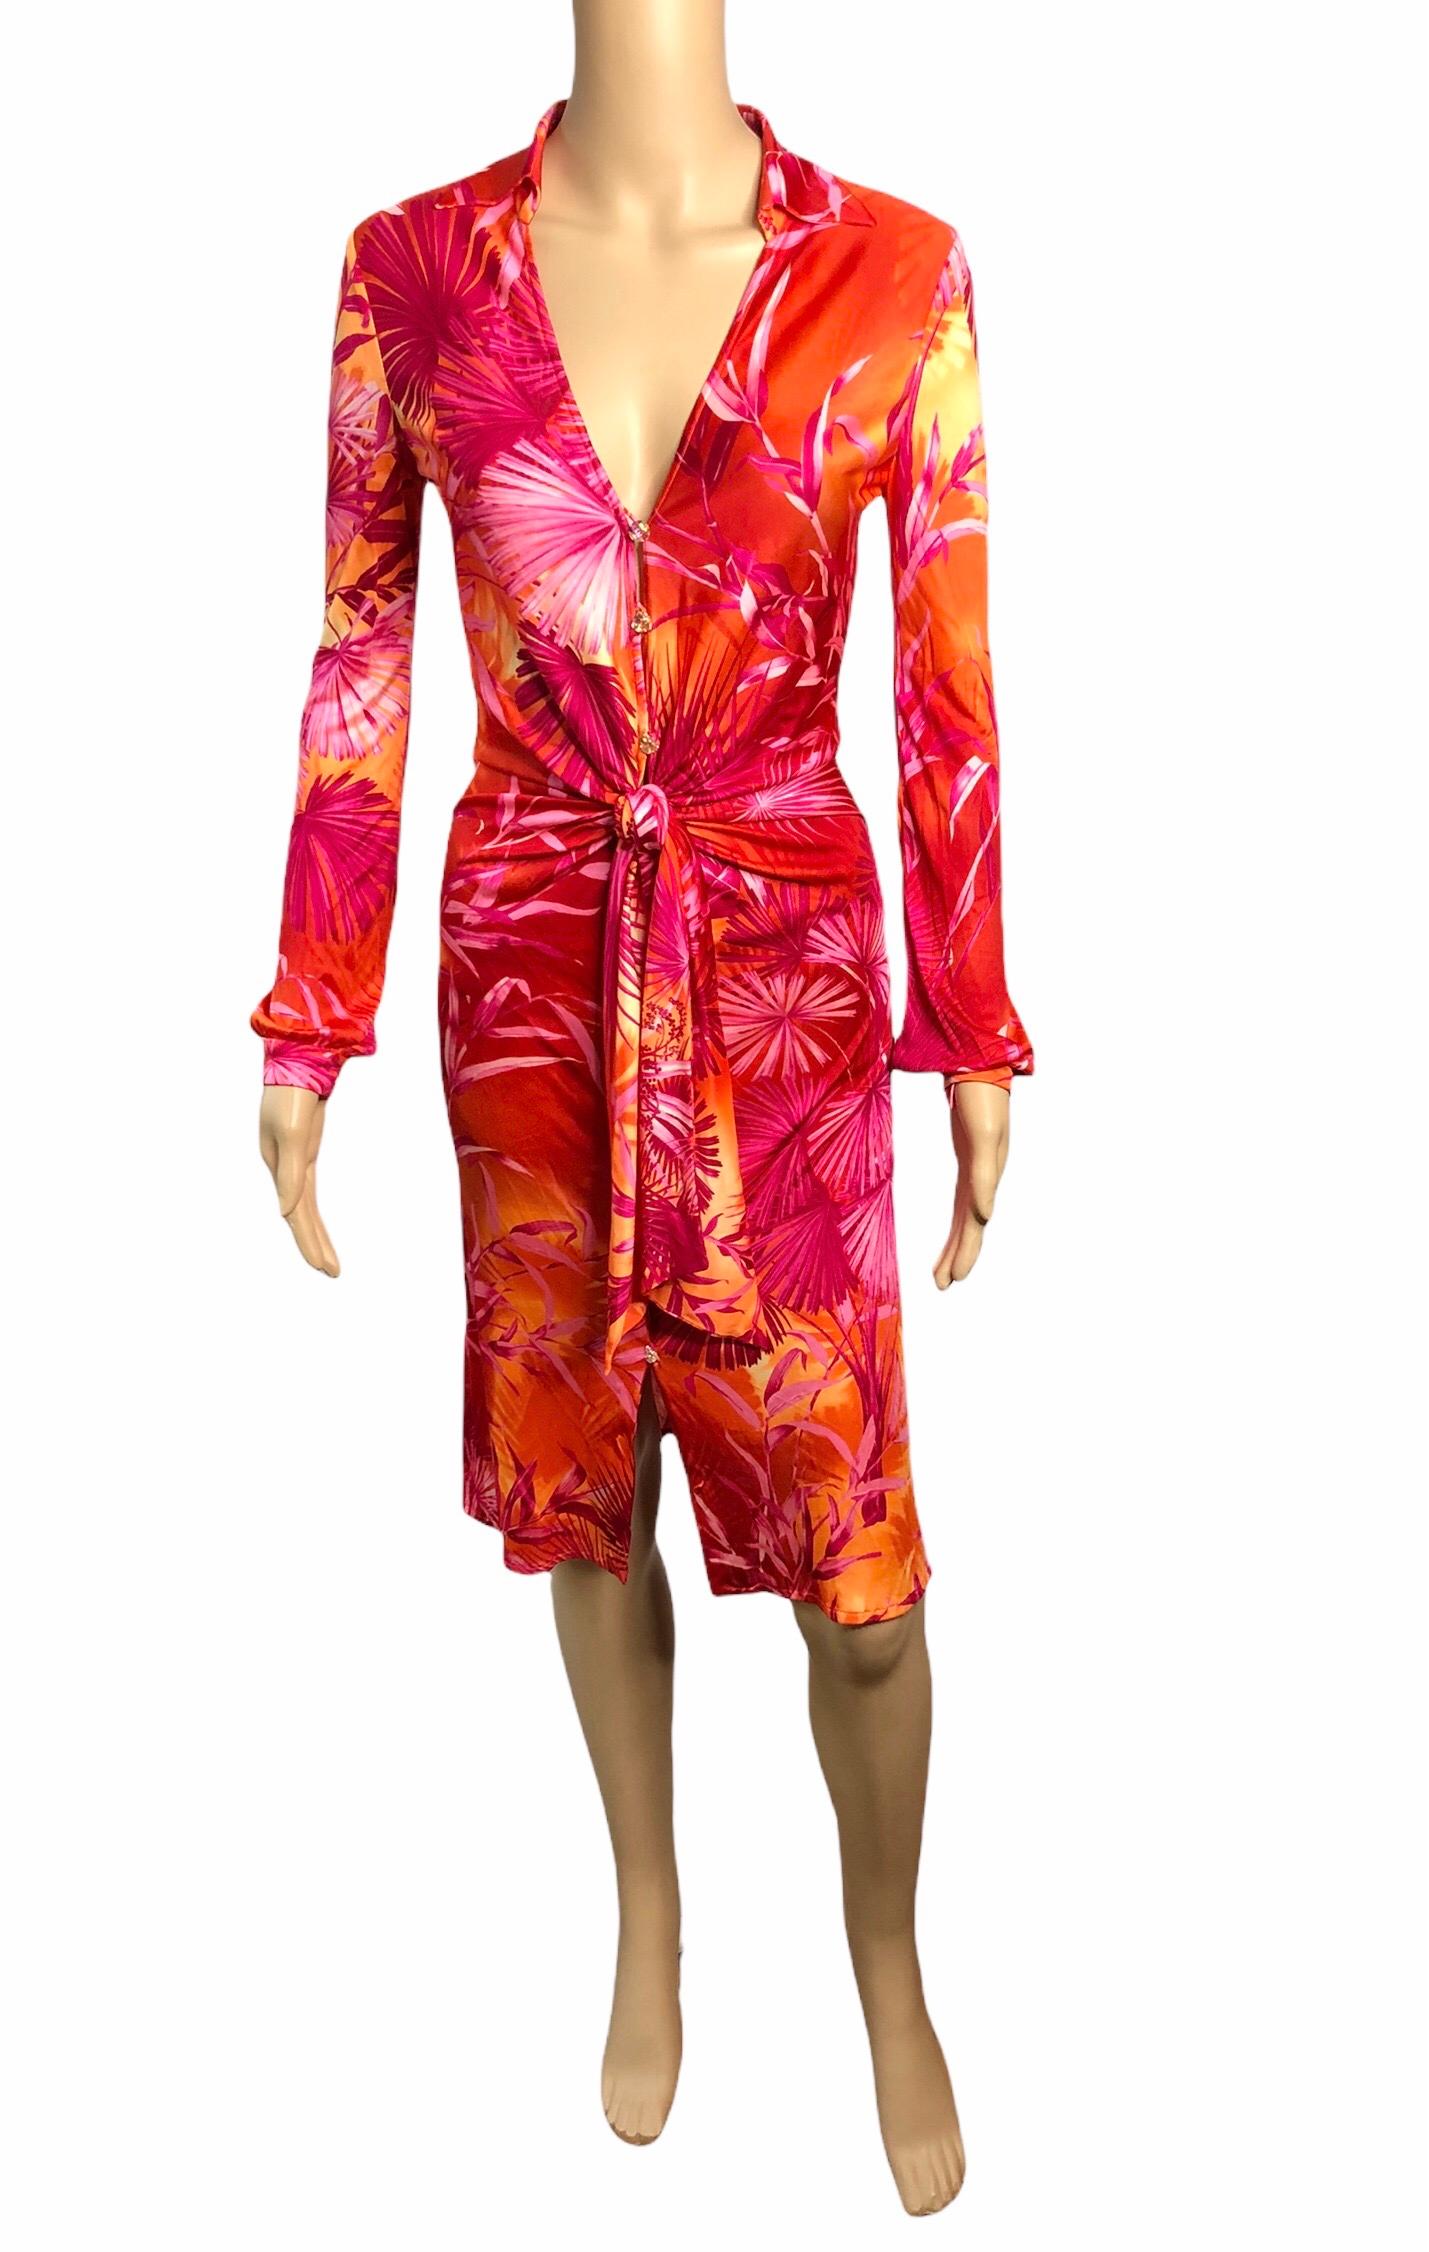 Gianni Versace Runway S/S 2000 Vintage Tropical Print Plunging Neckline Dress In Good Condition For Sale In Naples, FL